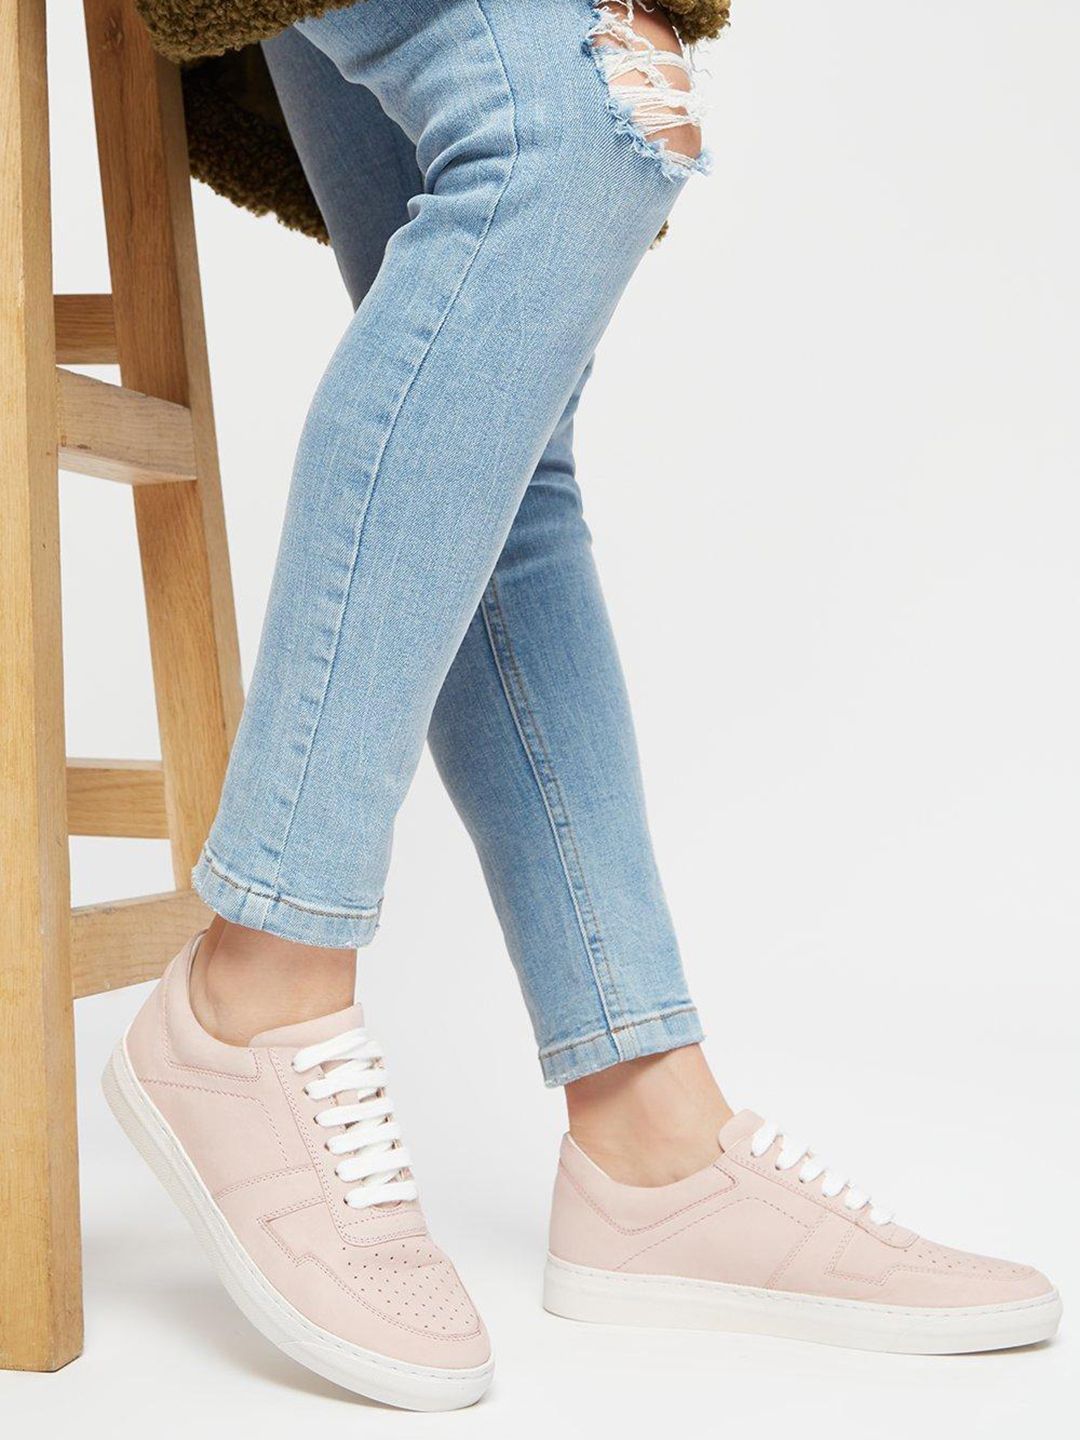 DOROTHY PERKINS Women Leather Sneakers with Perforated Detail Price in India